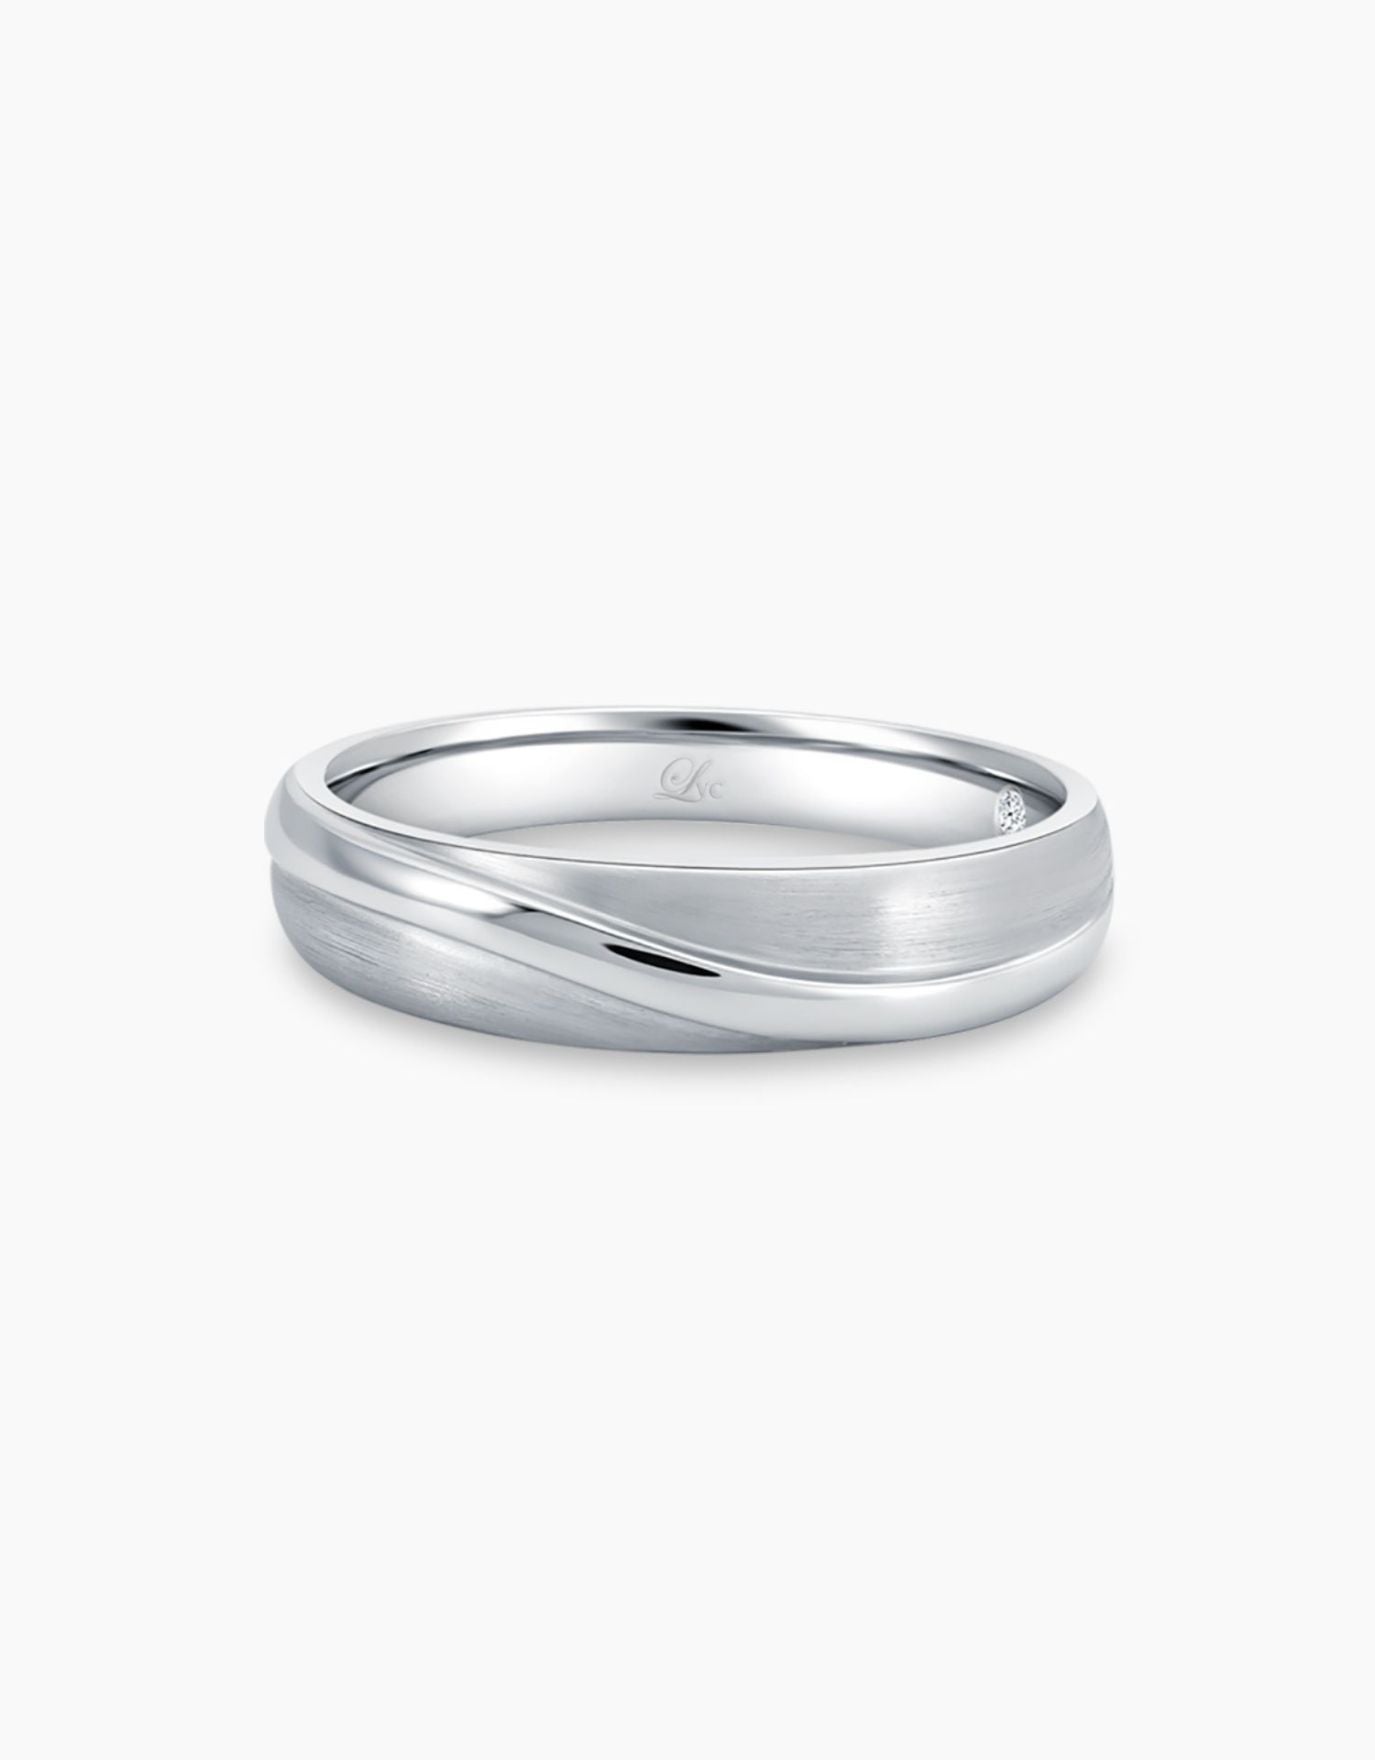 LVC Purete Classic Wedding Band with Glossy Finish in Platinum